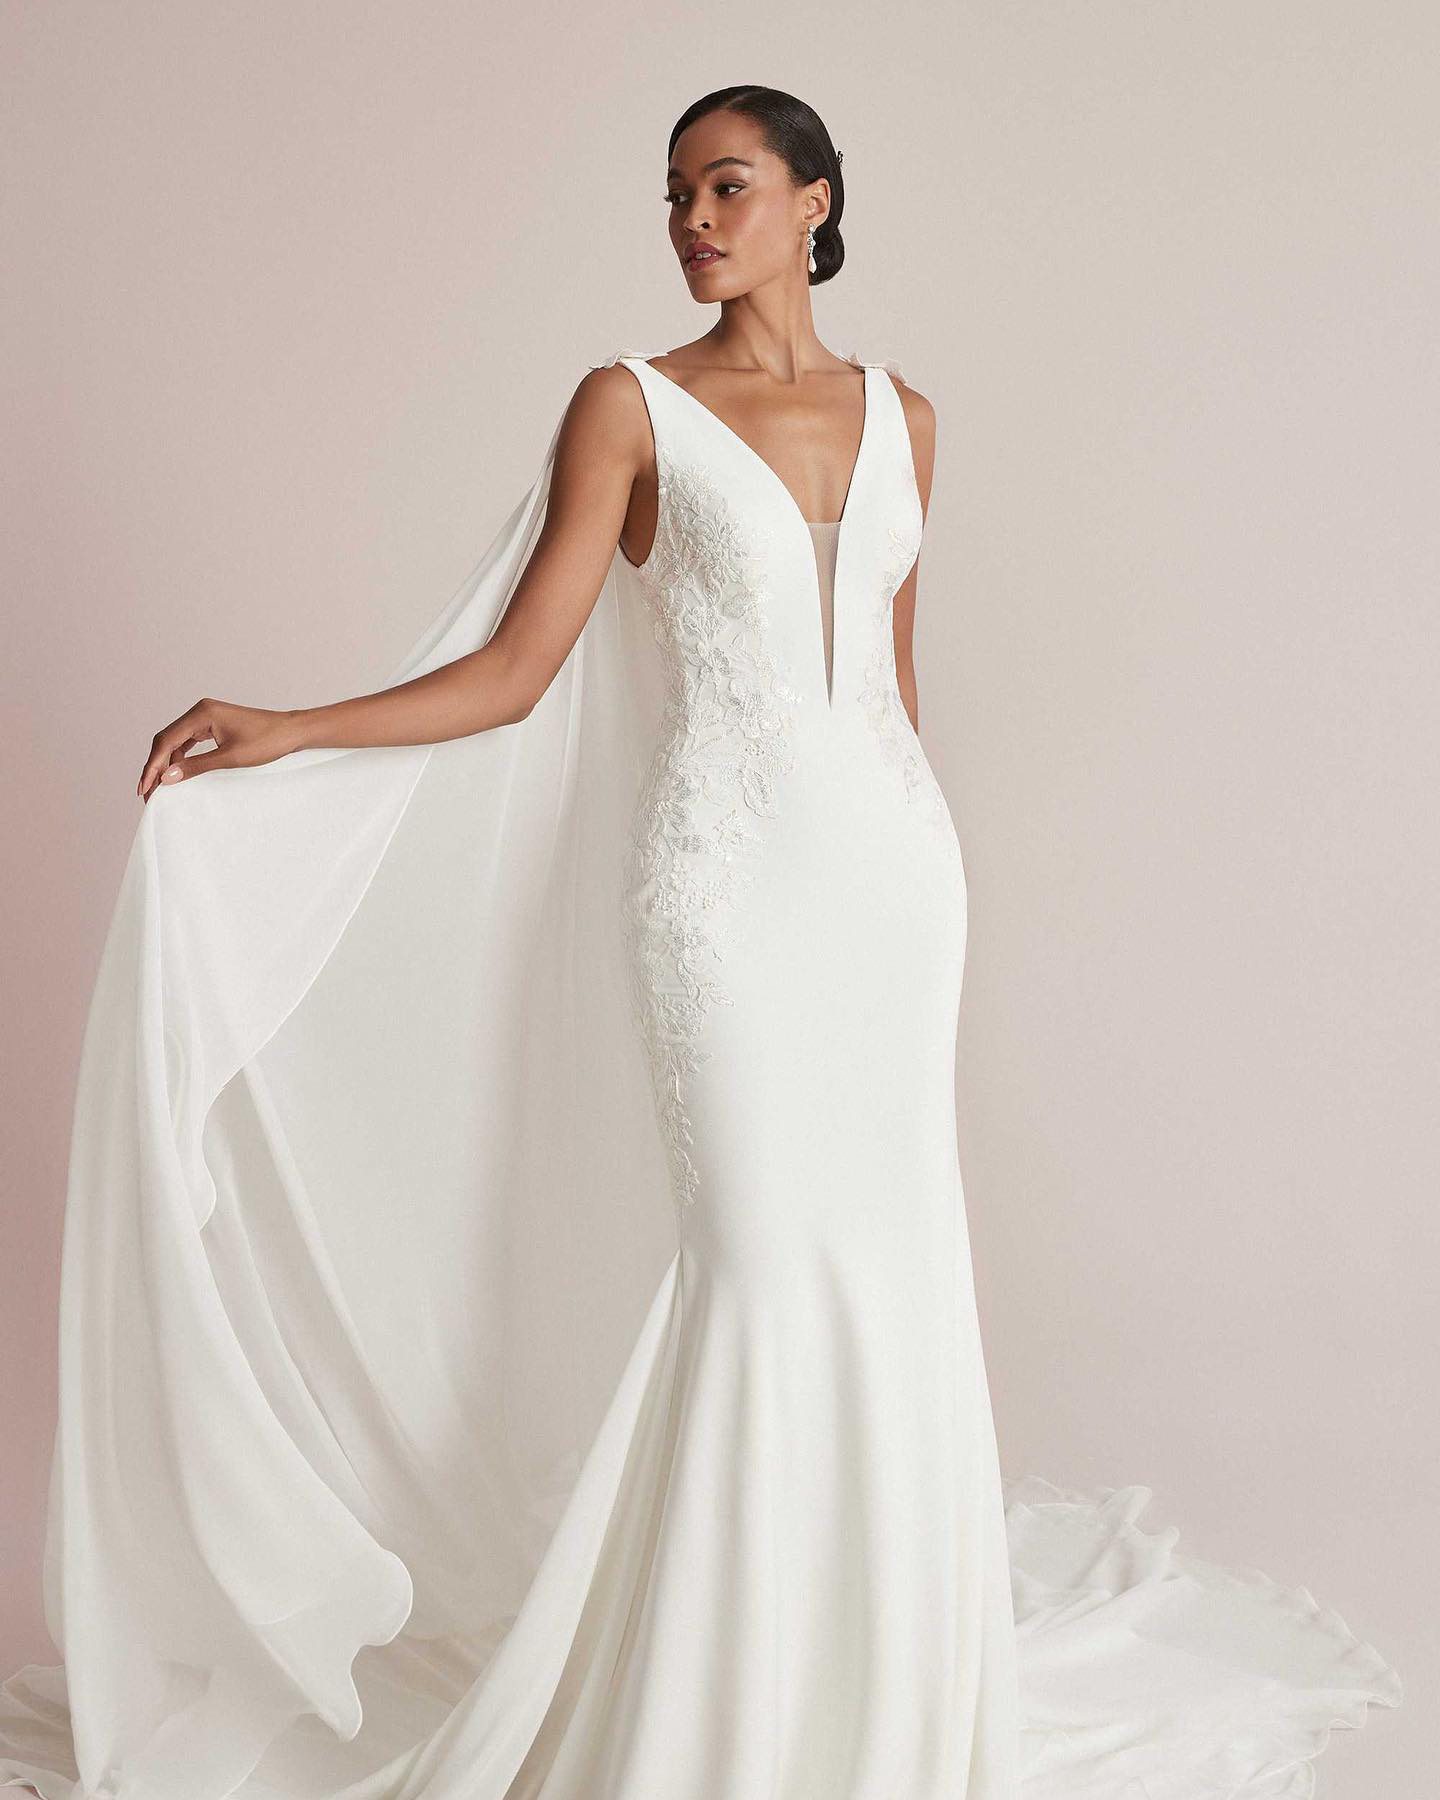 A woman in a bridal gown from Carrington's Bridal Boutique.